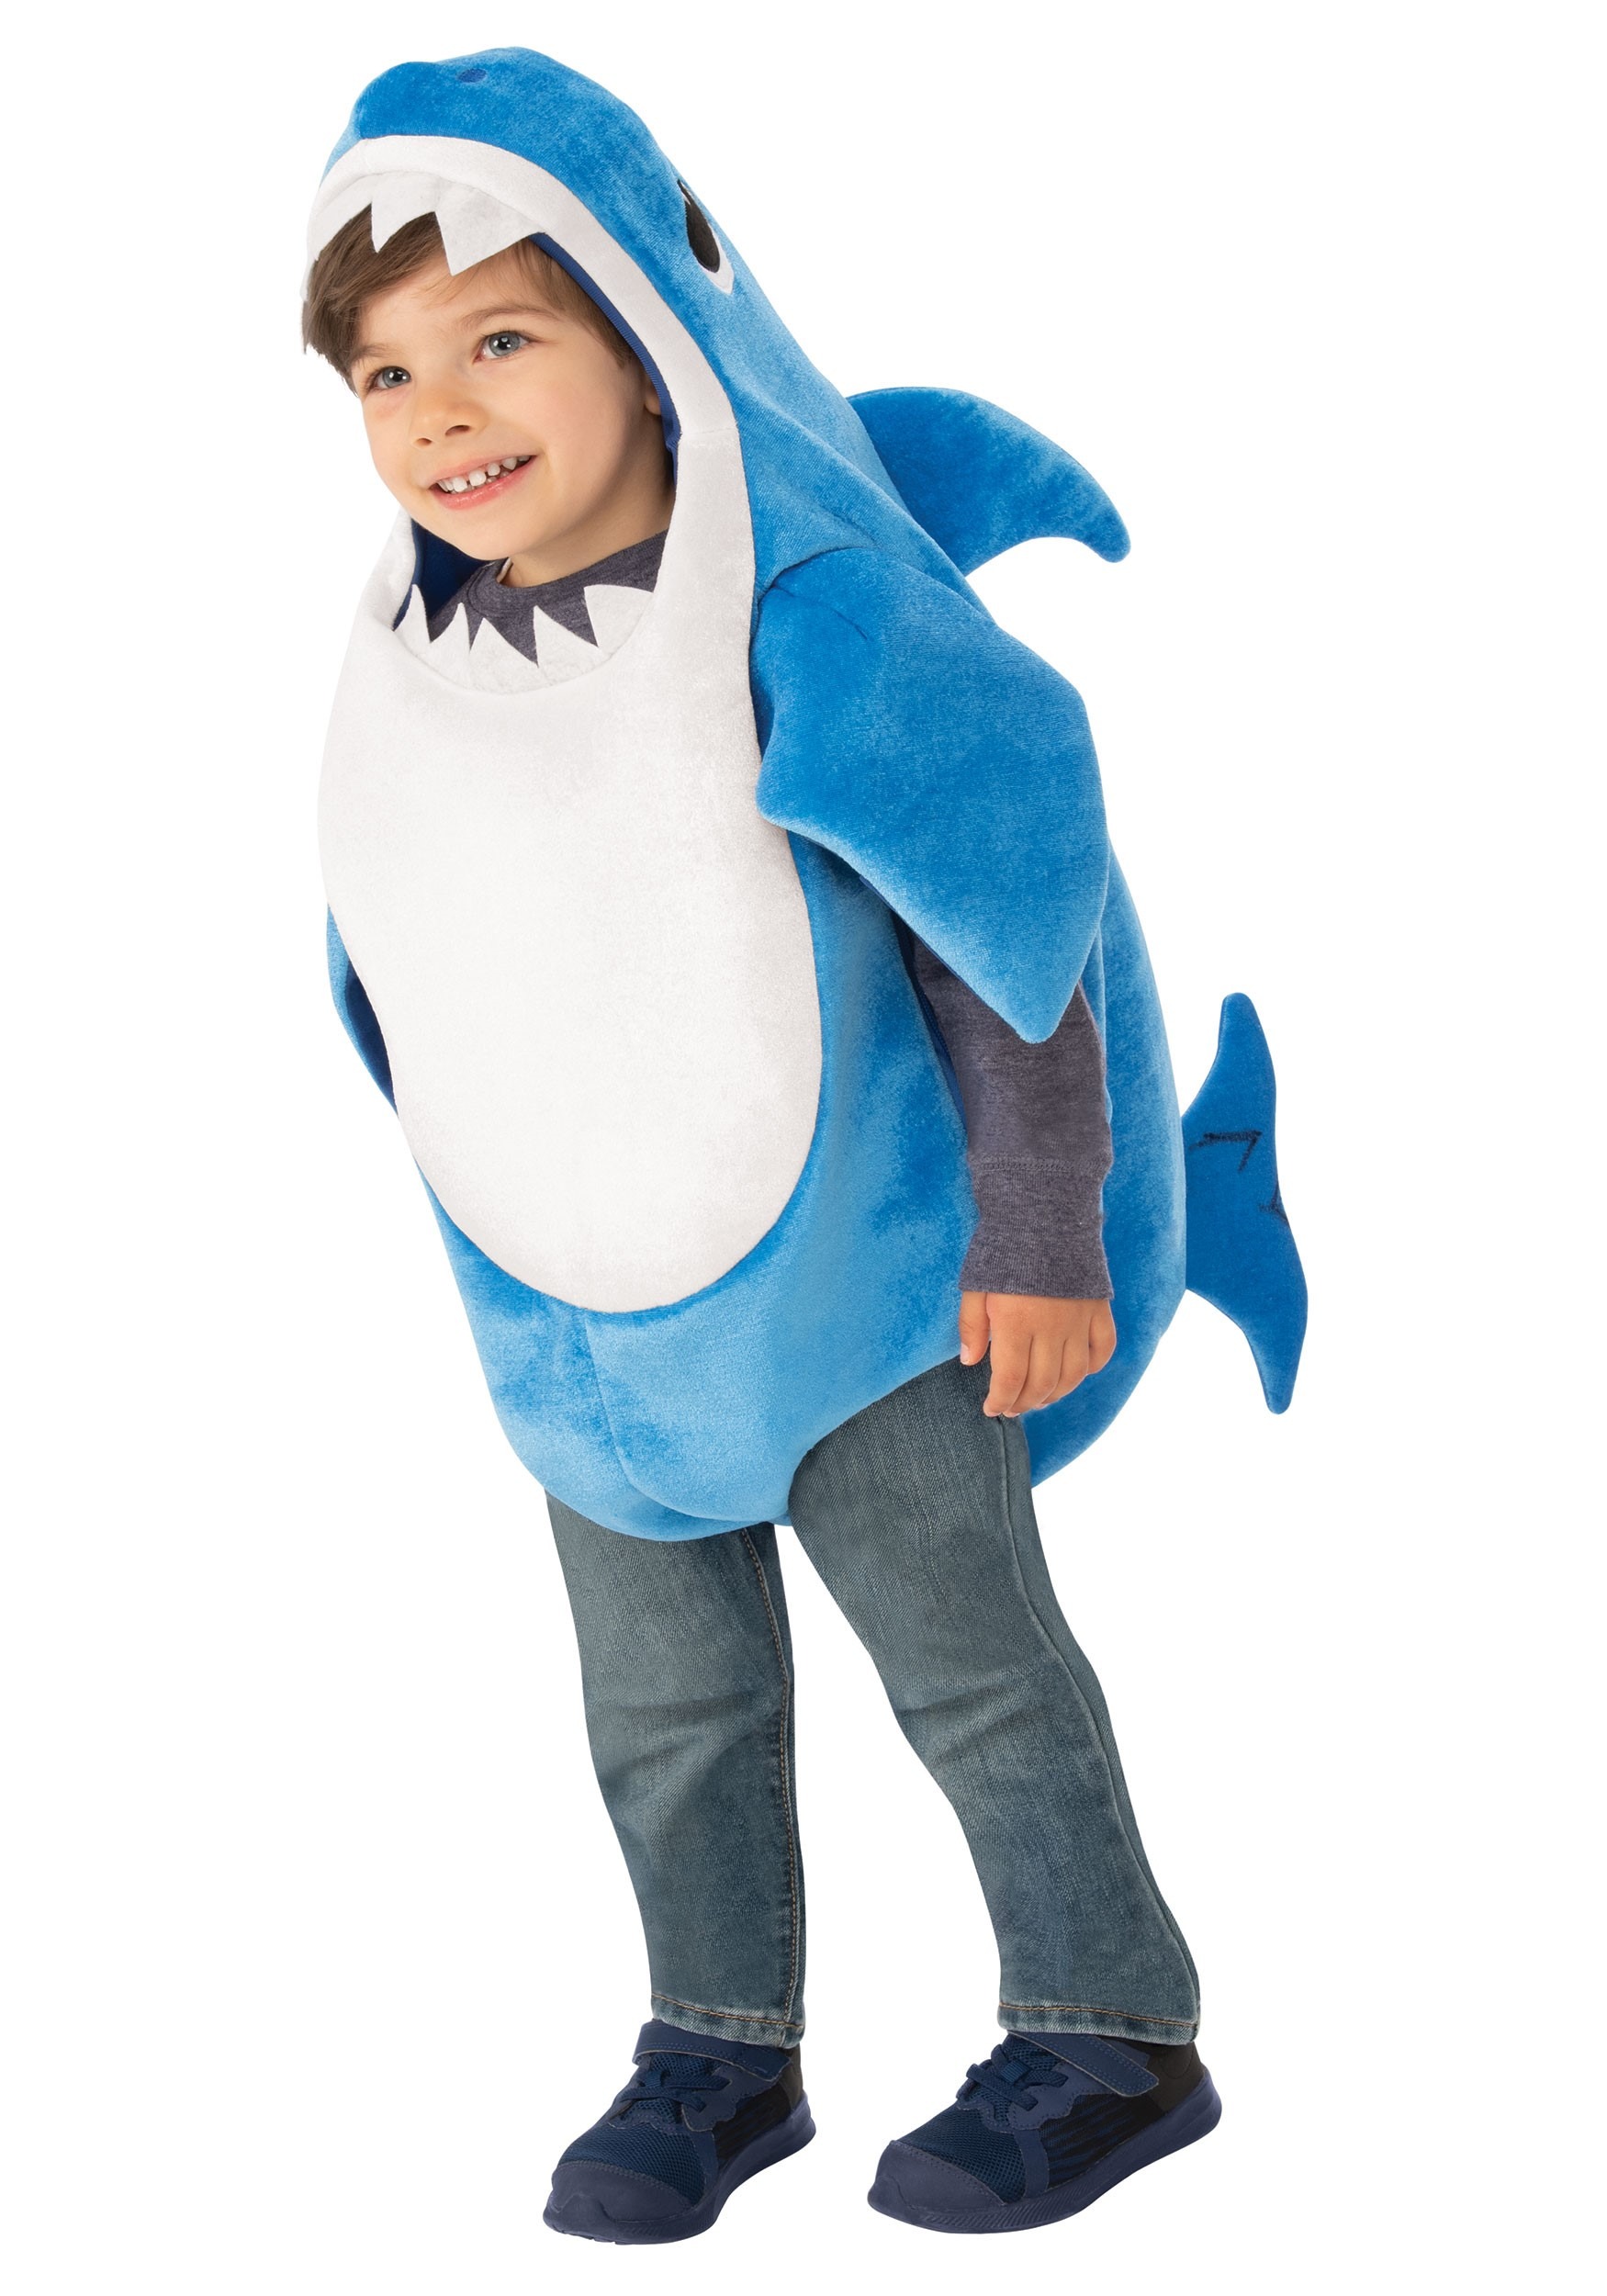 https://images.halloweencostumes.ca/products/59659/1-1/baby-shark-daddy-shark-toddler-costume-with-sound.jpg